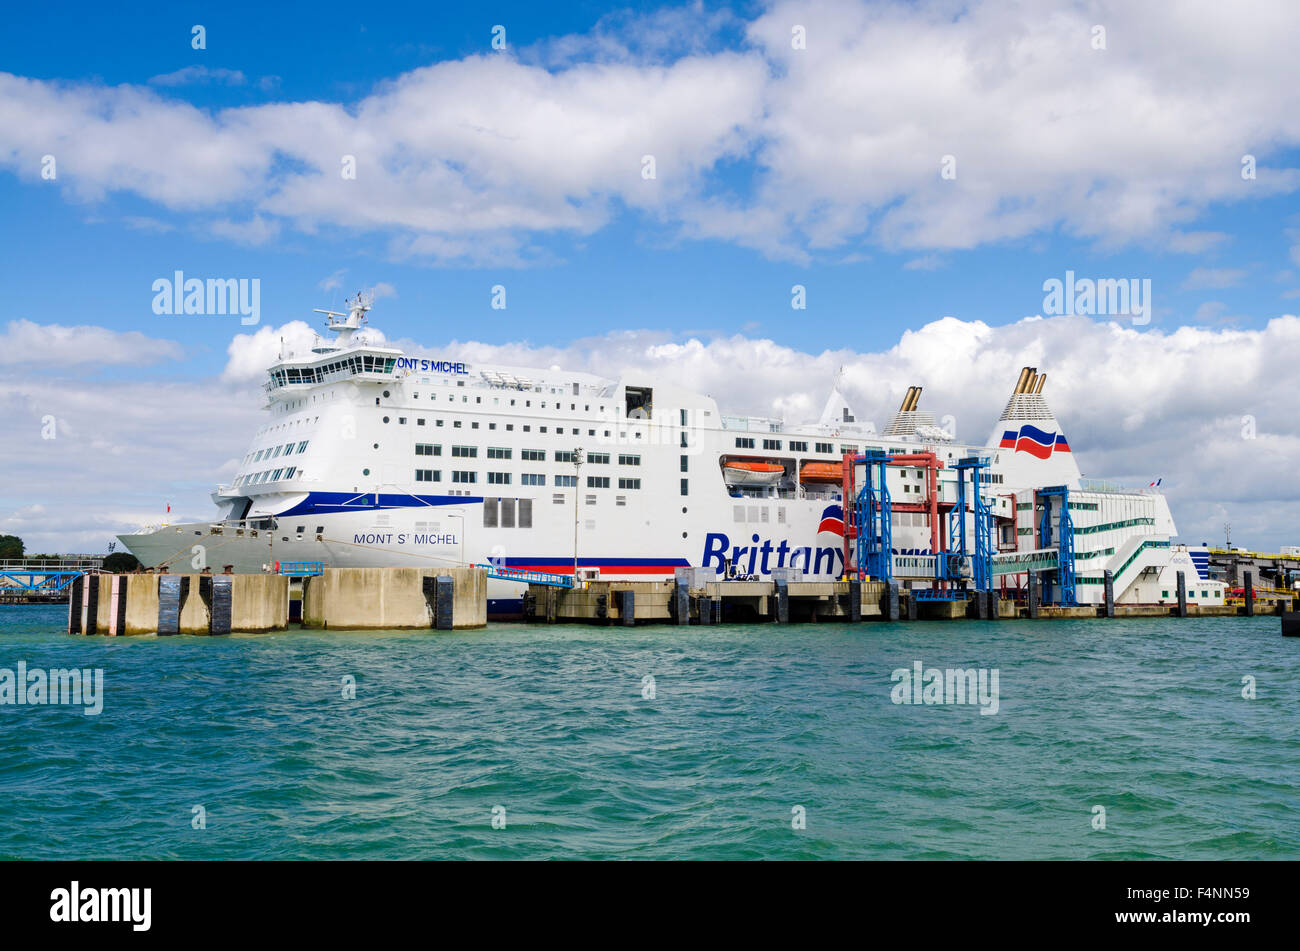 Brittany Ferries Mont St Michel passenger ferry docked at Portsmouth Ferry Terminal, Hampshire, England. Stock Photo